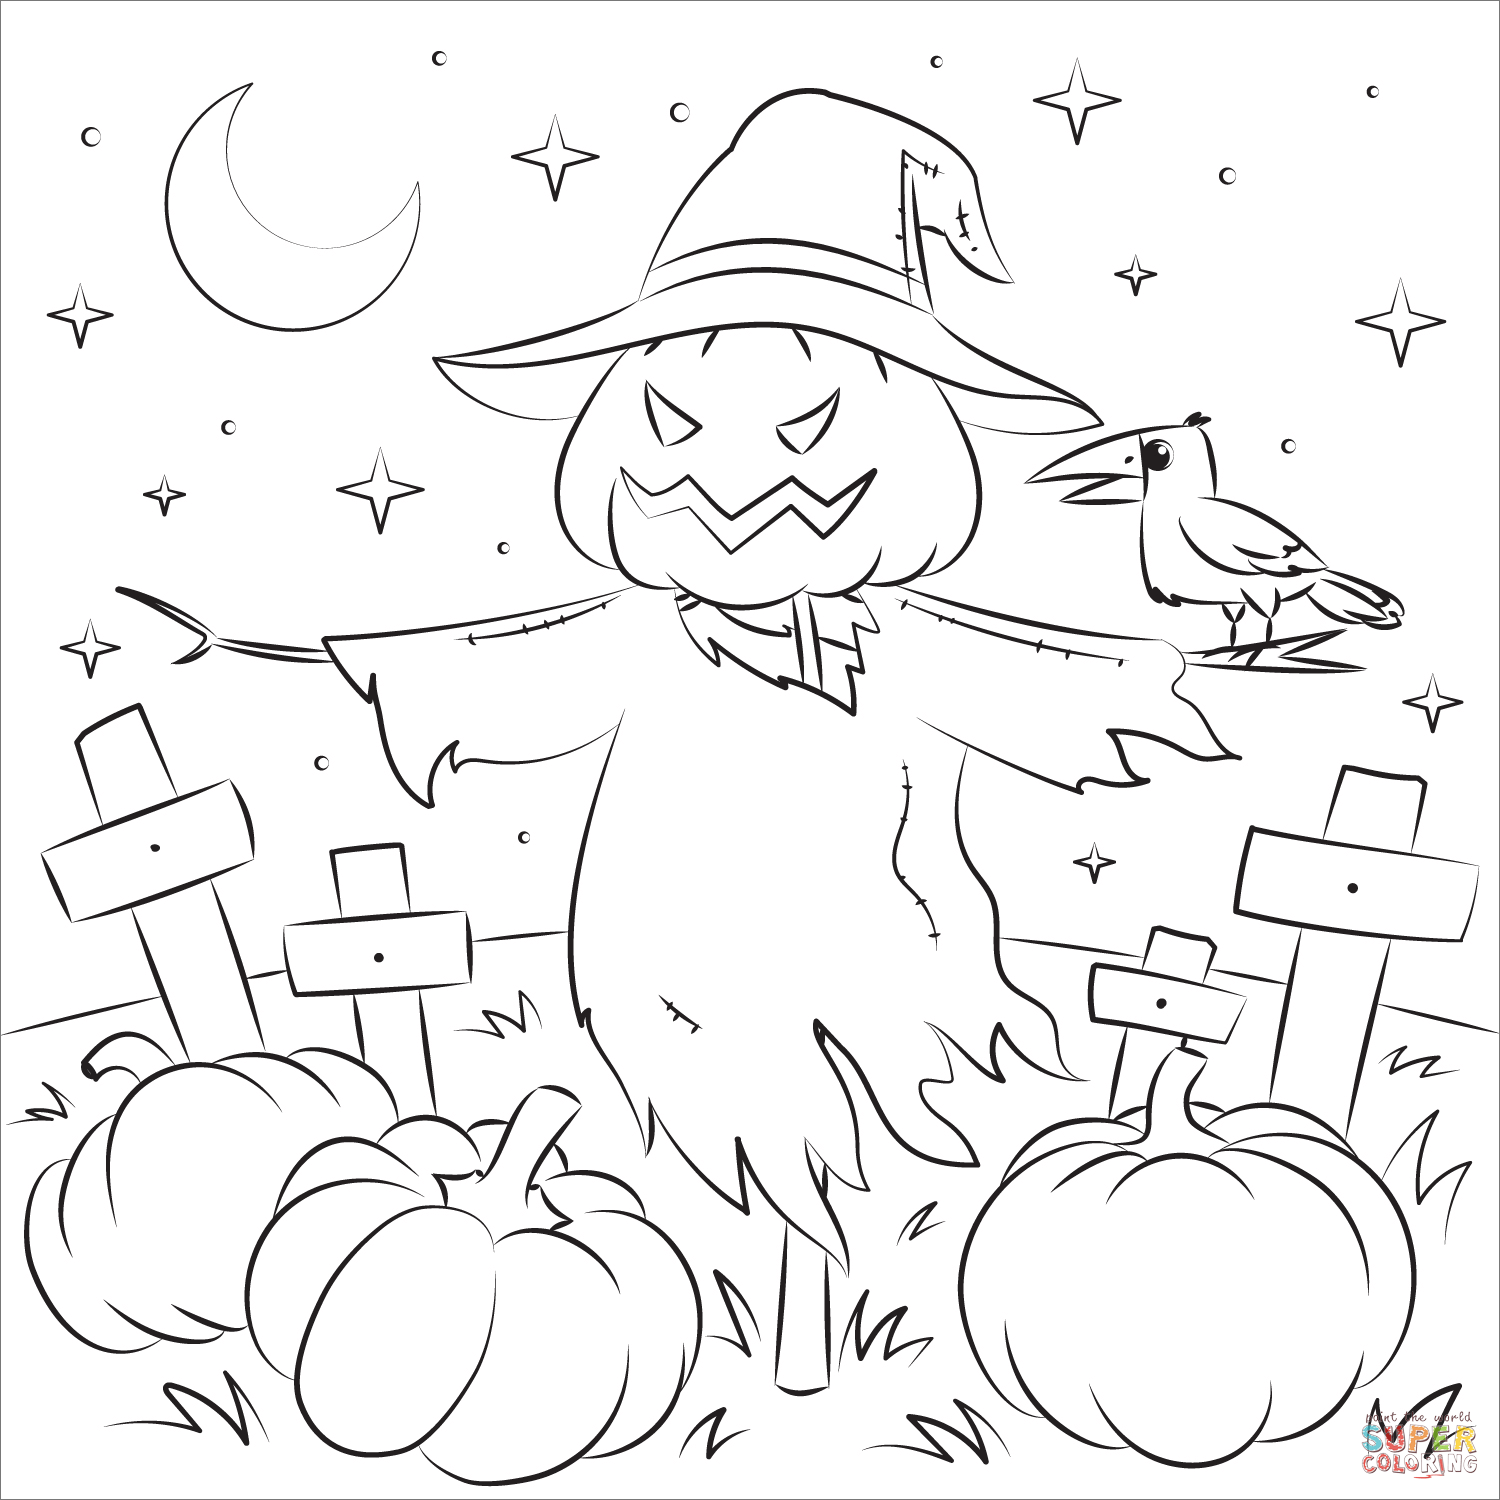 Scarecrow coloring page free printable coloring pages